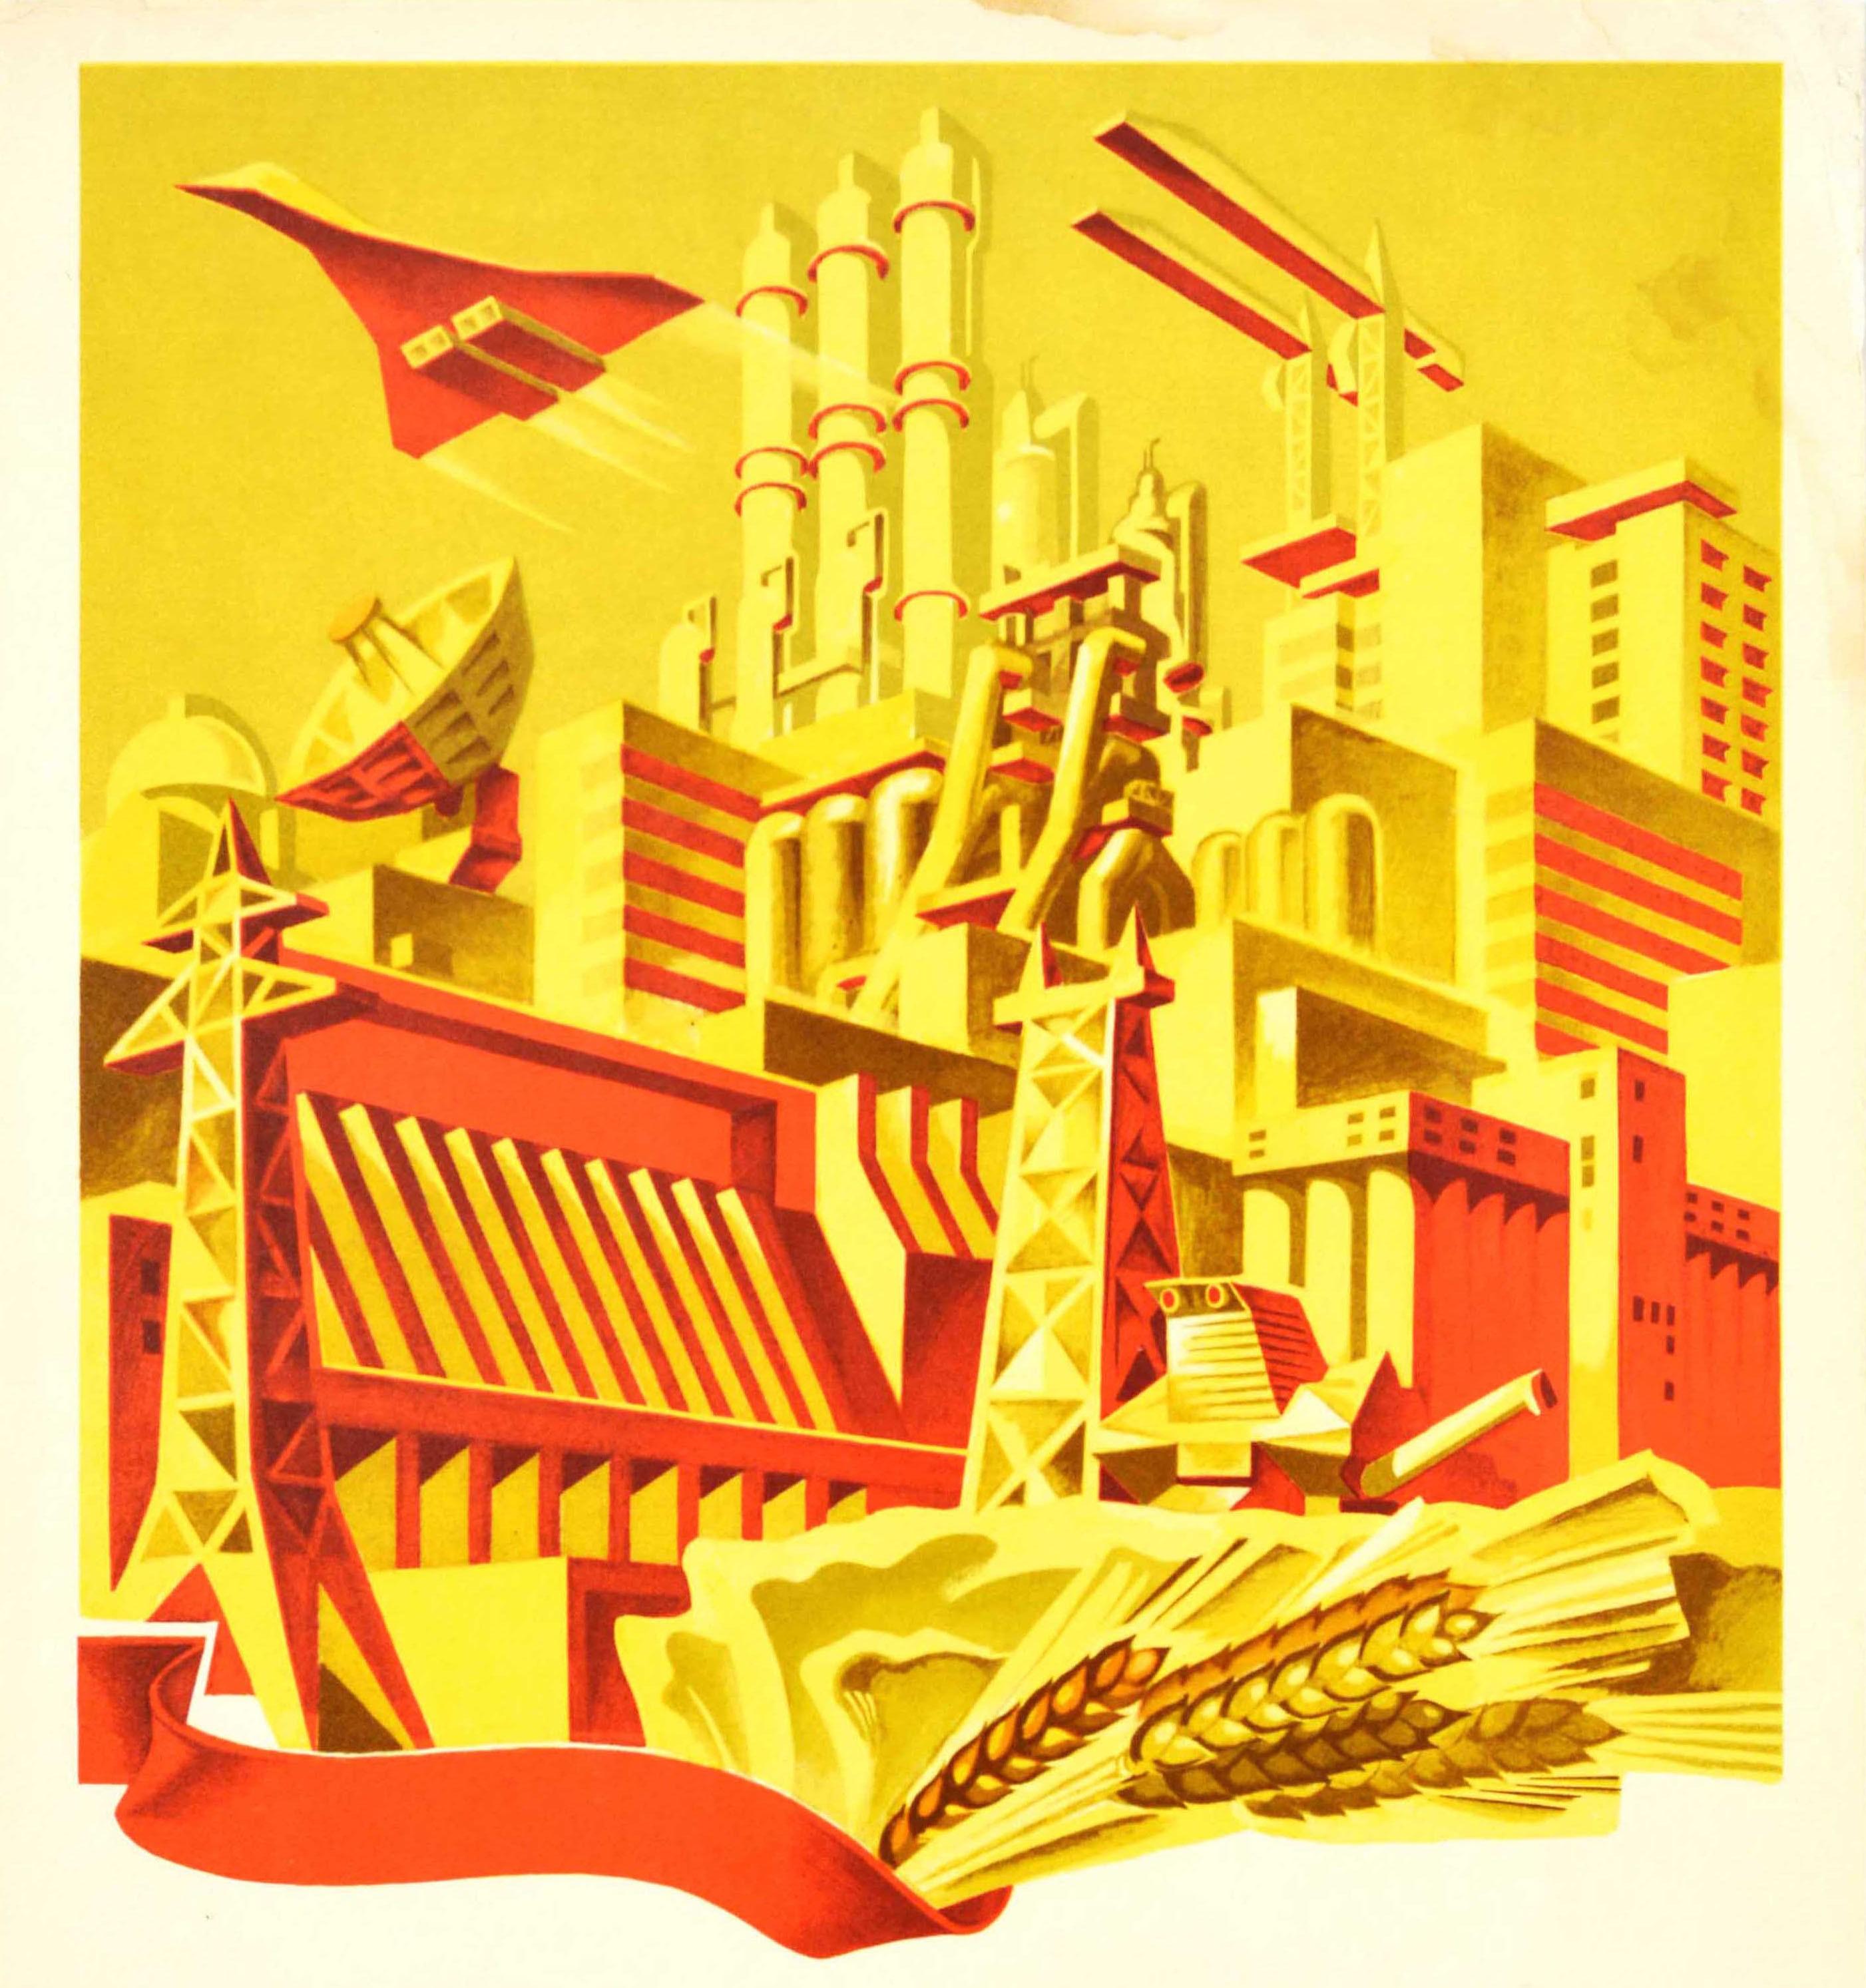 Original vintage Soviet propaganda poster - To New Successes in the Construction of Communism! / К Новым Успехам В Строительстве Коммунизма! - featuring a supersonic concorde style plane flying over industrial factories and satellite communications